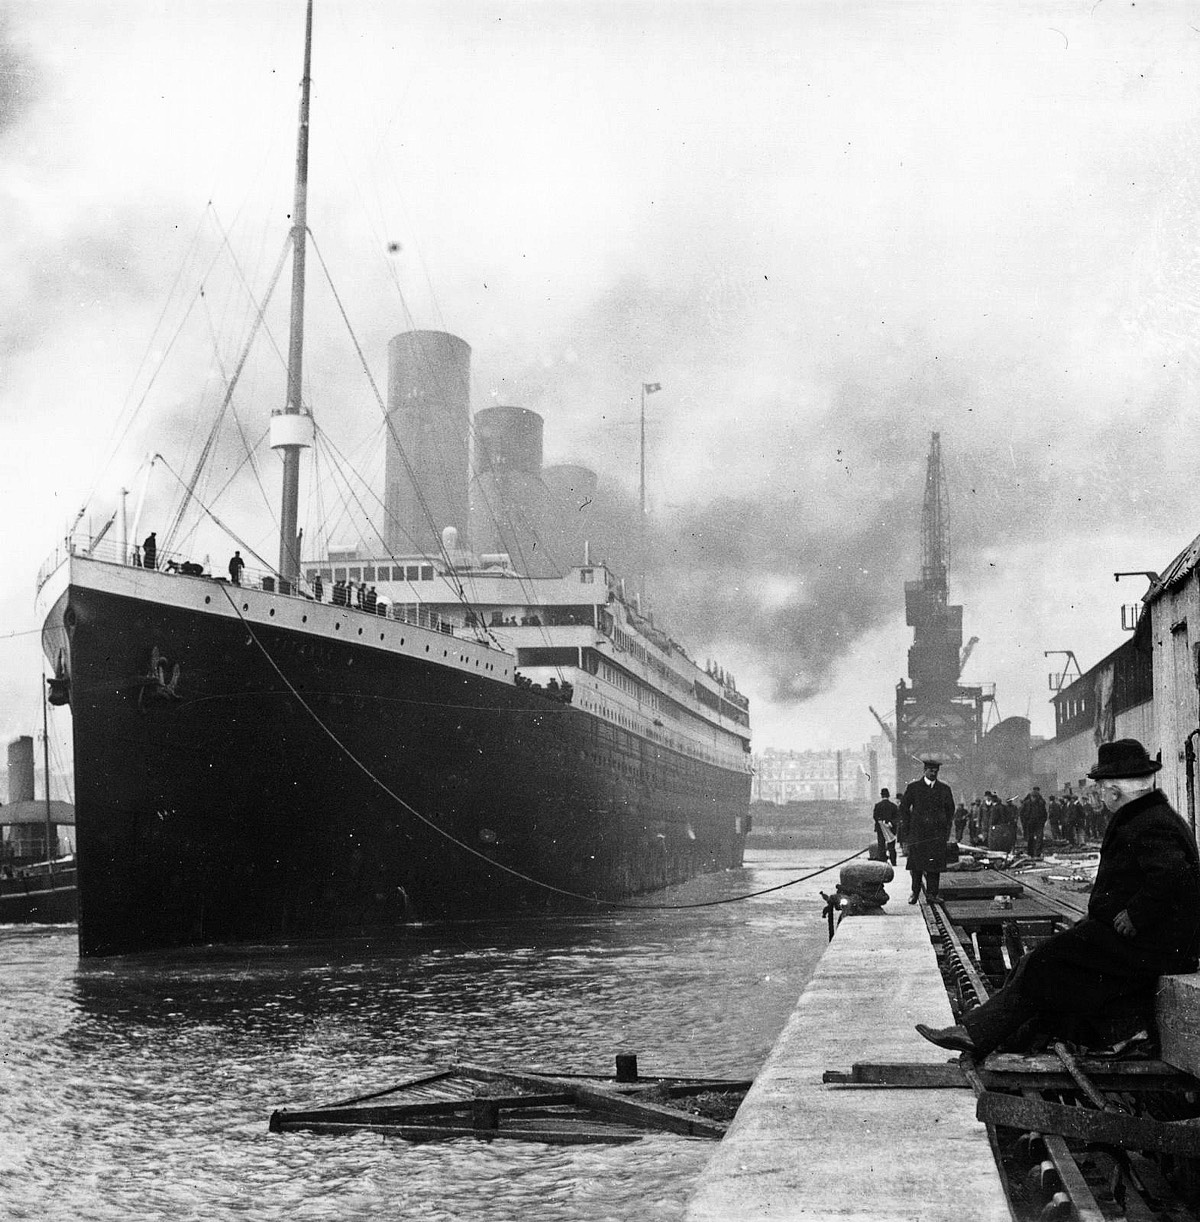 3) A photo of the Titanic in Southhampton in April 1912, prior to its disastrous maiden voyage. Birling’s comments about the Titanic are key to understanding his character.